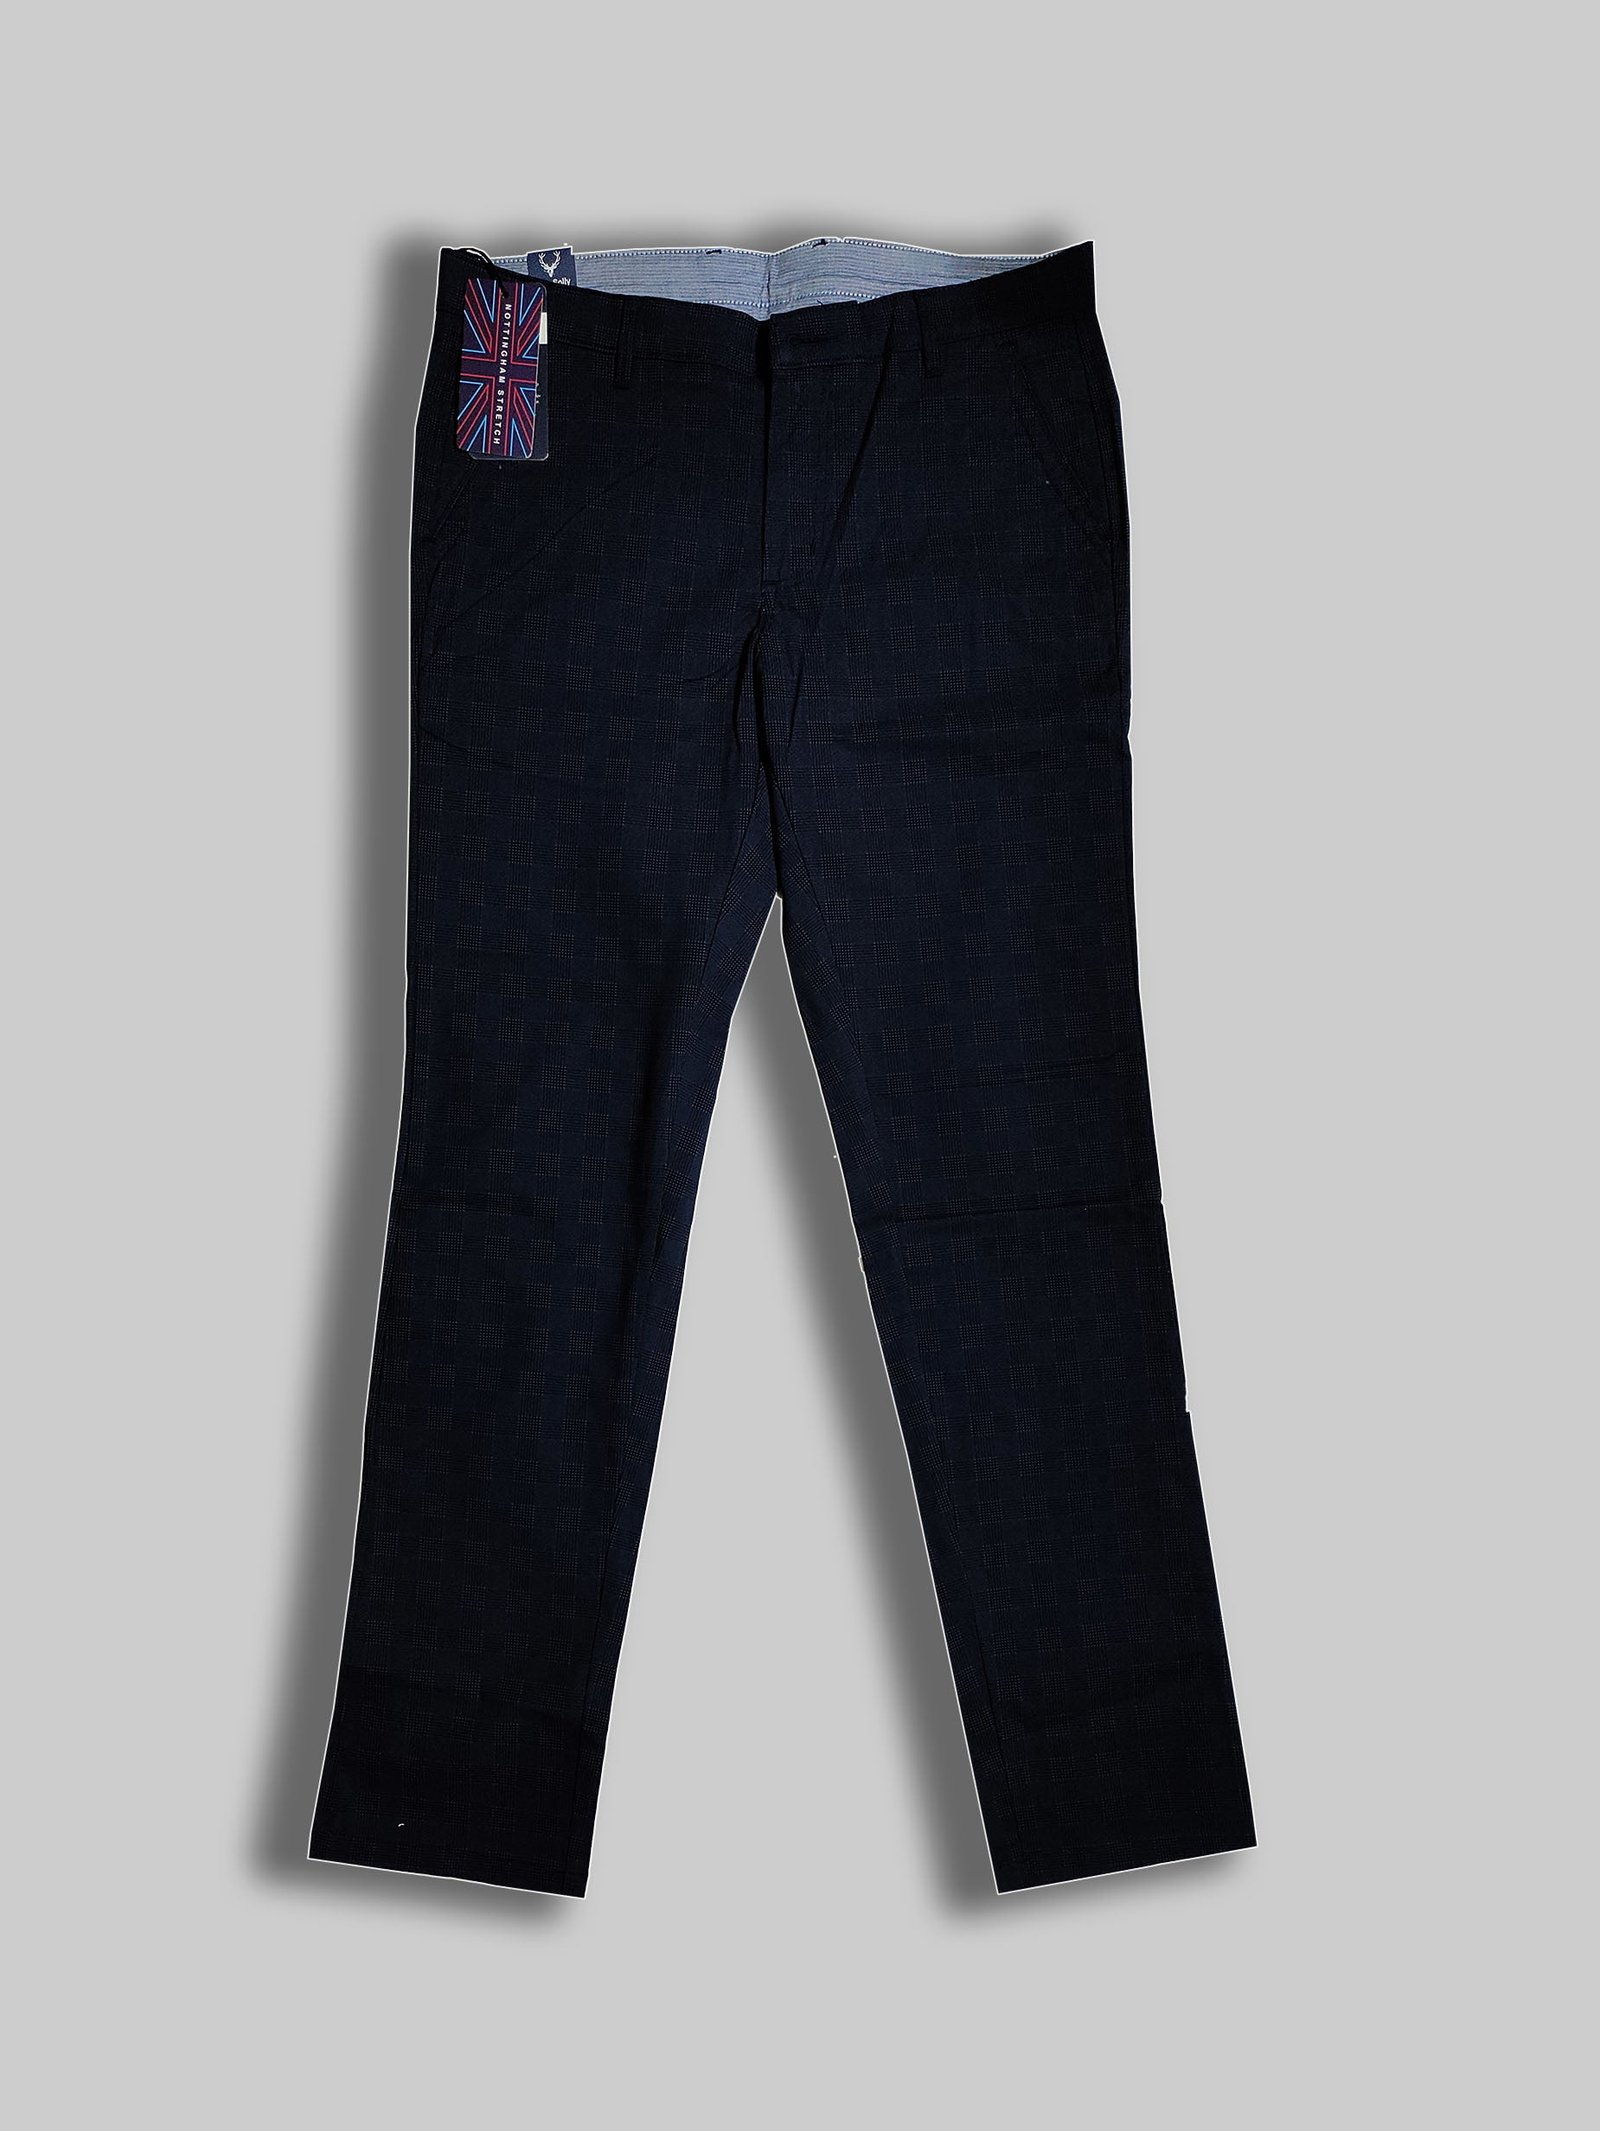 Buy Allen Solly Men Solid Regular Fit Formal Trouser - Blue Online at Low  Prices in India - Paytmmall.com